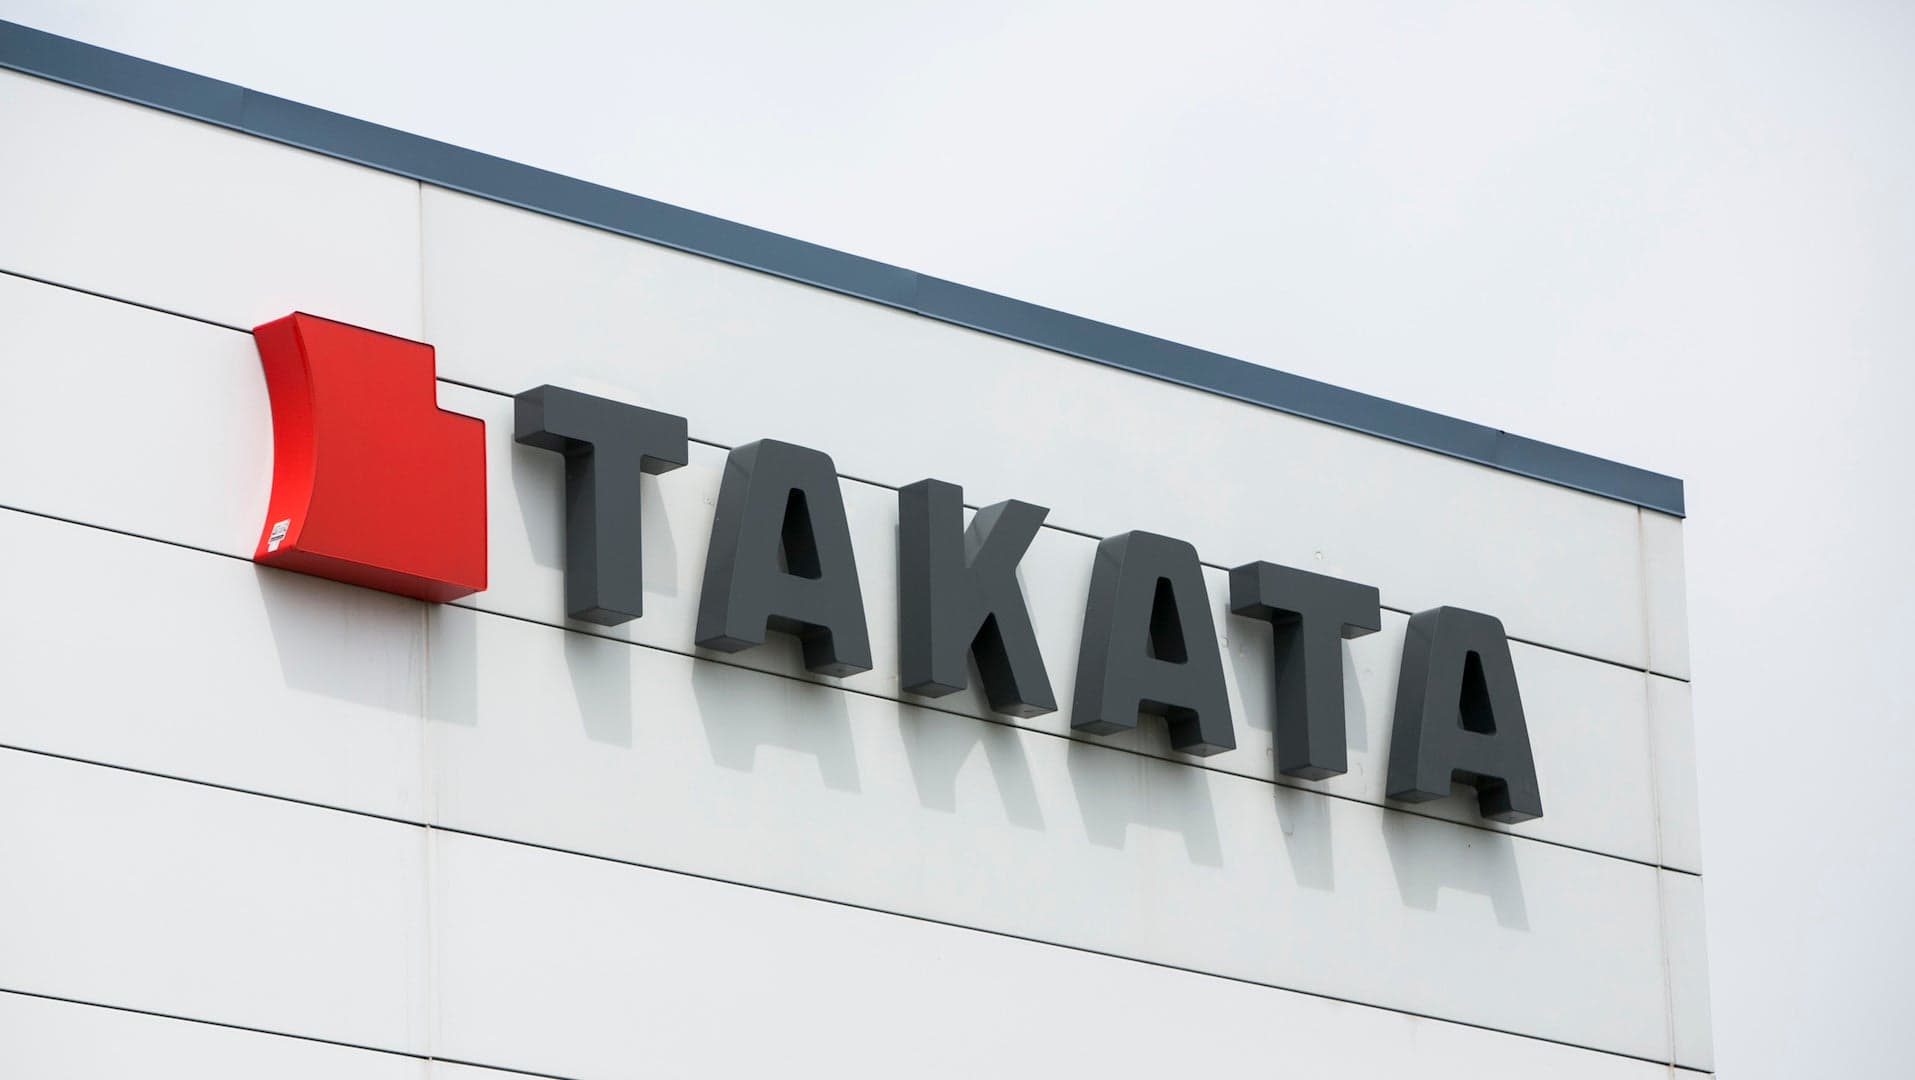 An Exploding Truck Full of Takata Airbag Parts Killed a Woman in Texas